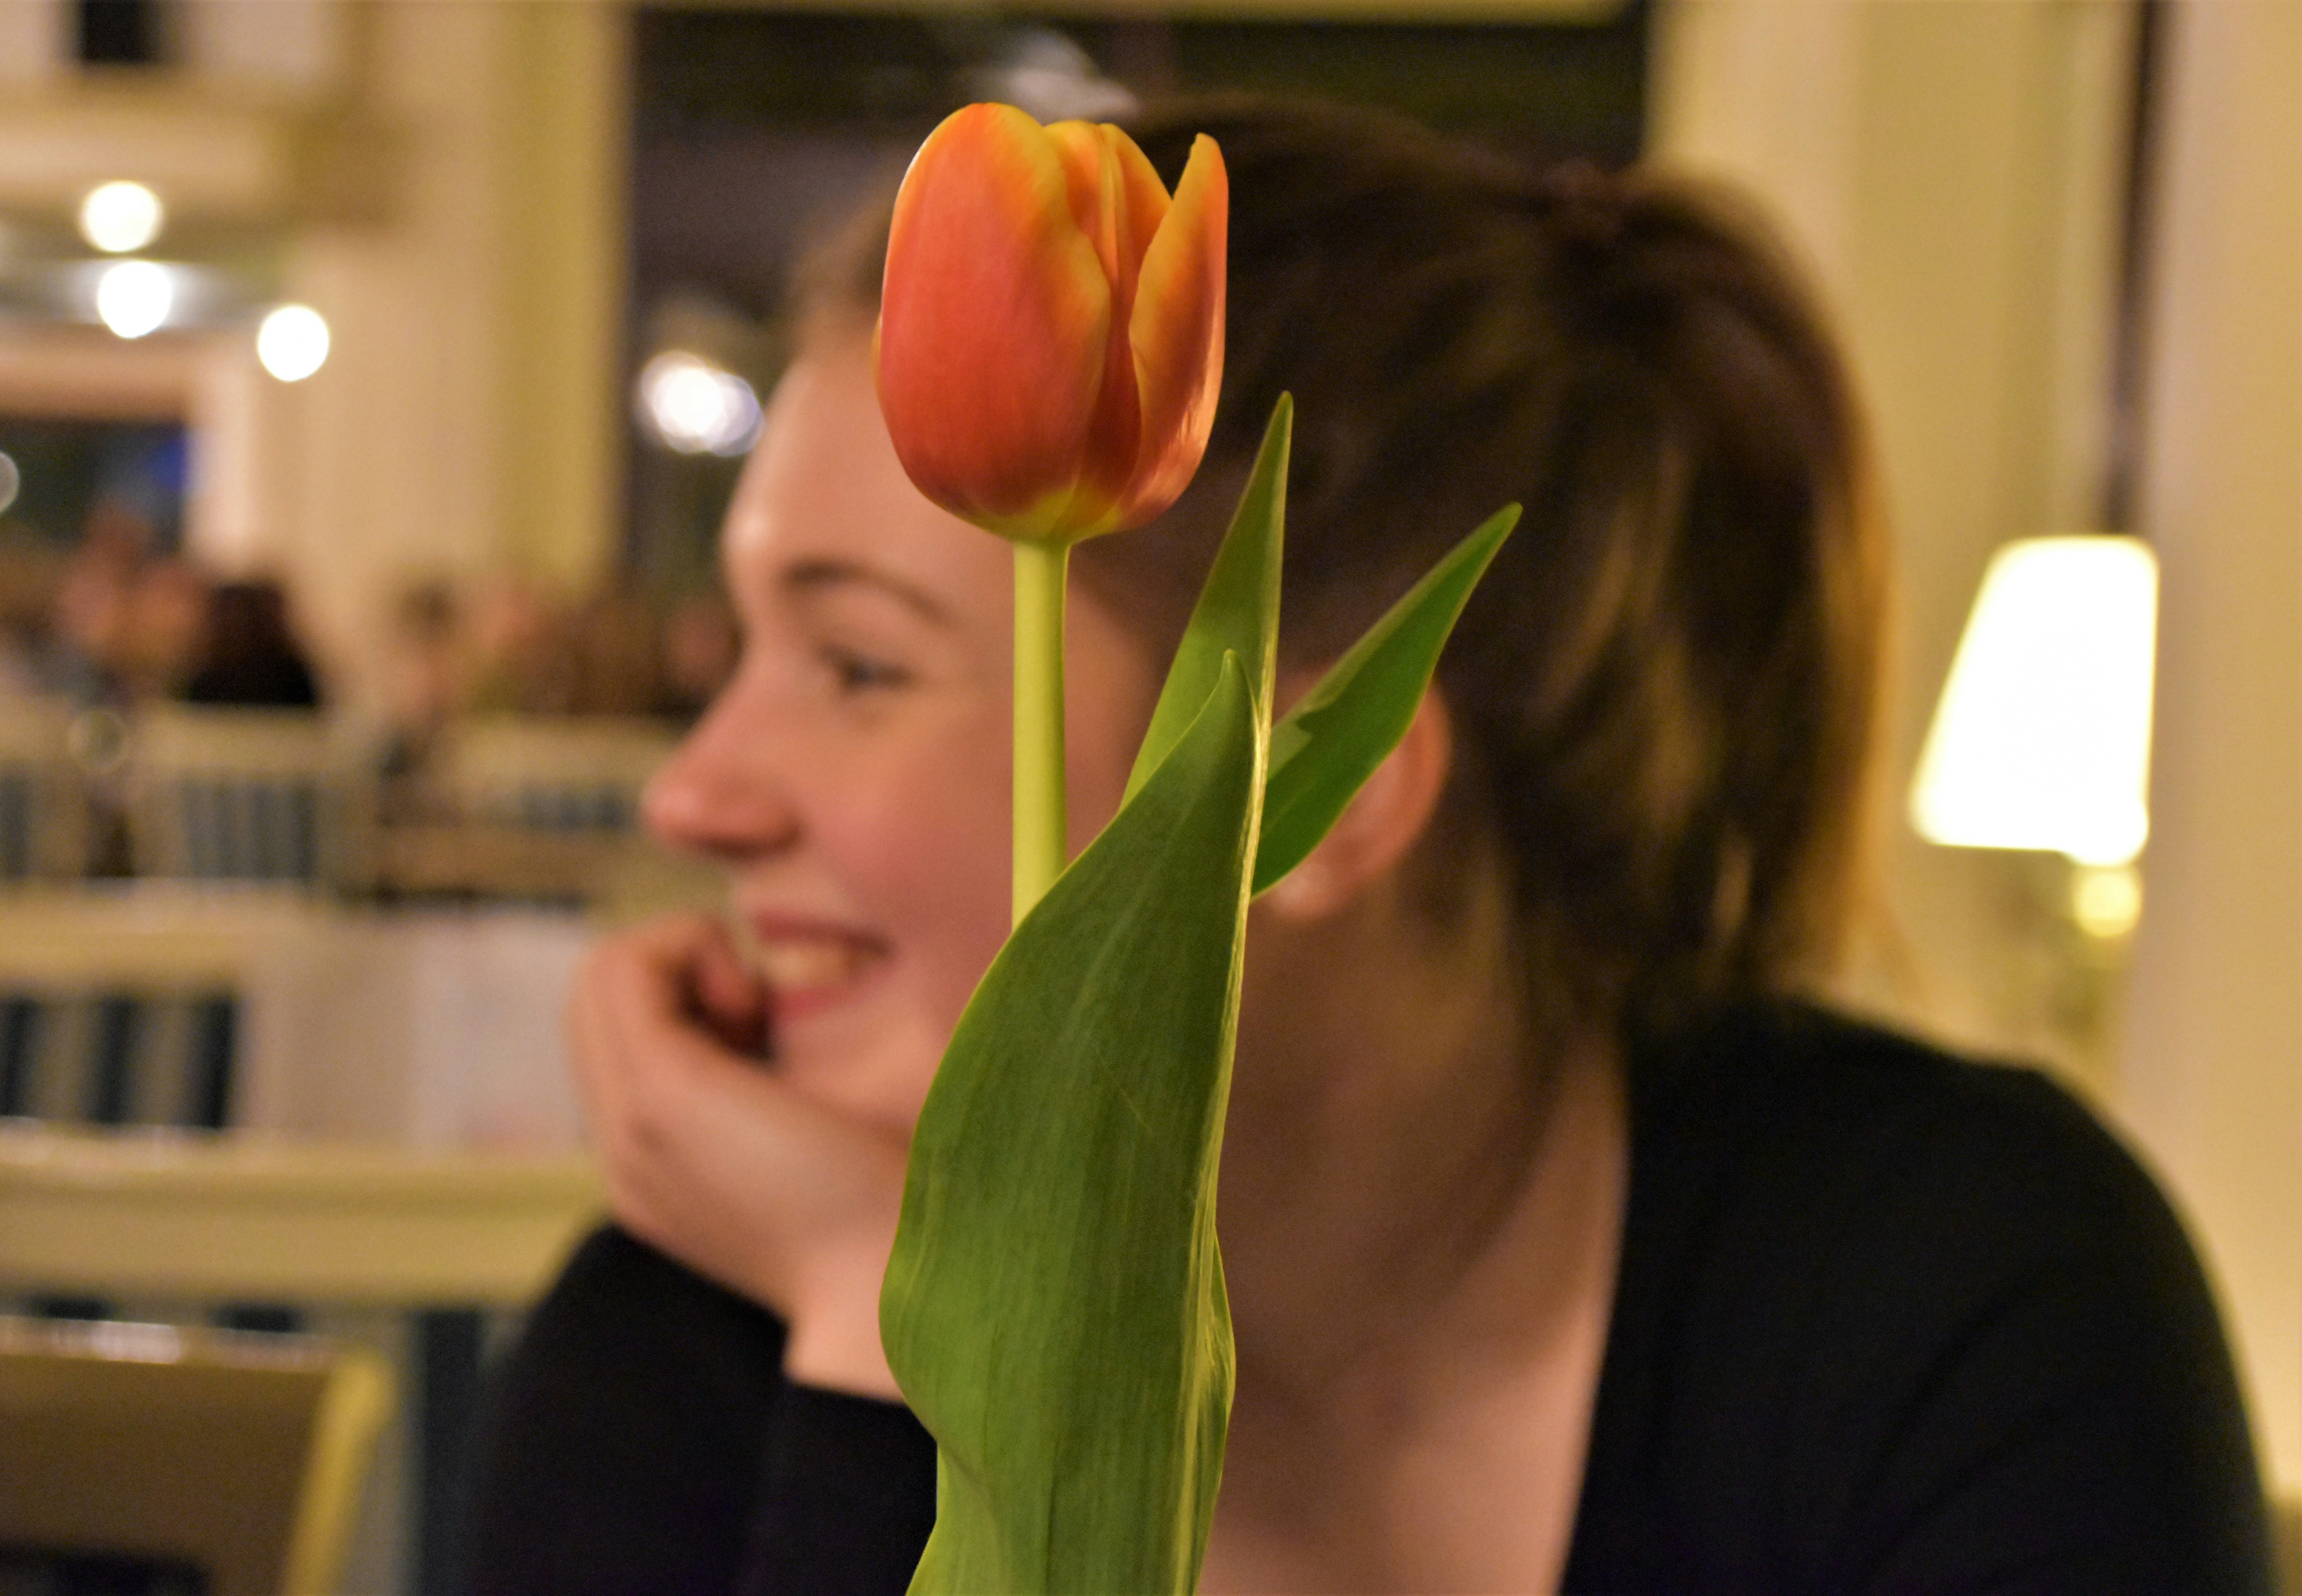 Laura and a red tulip , people and plants